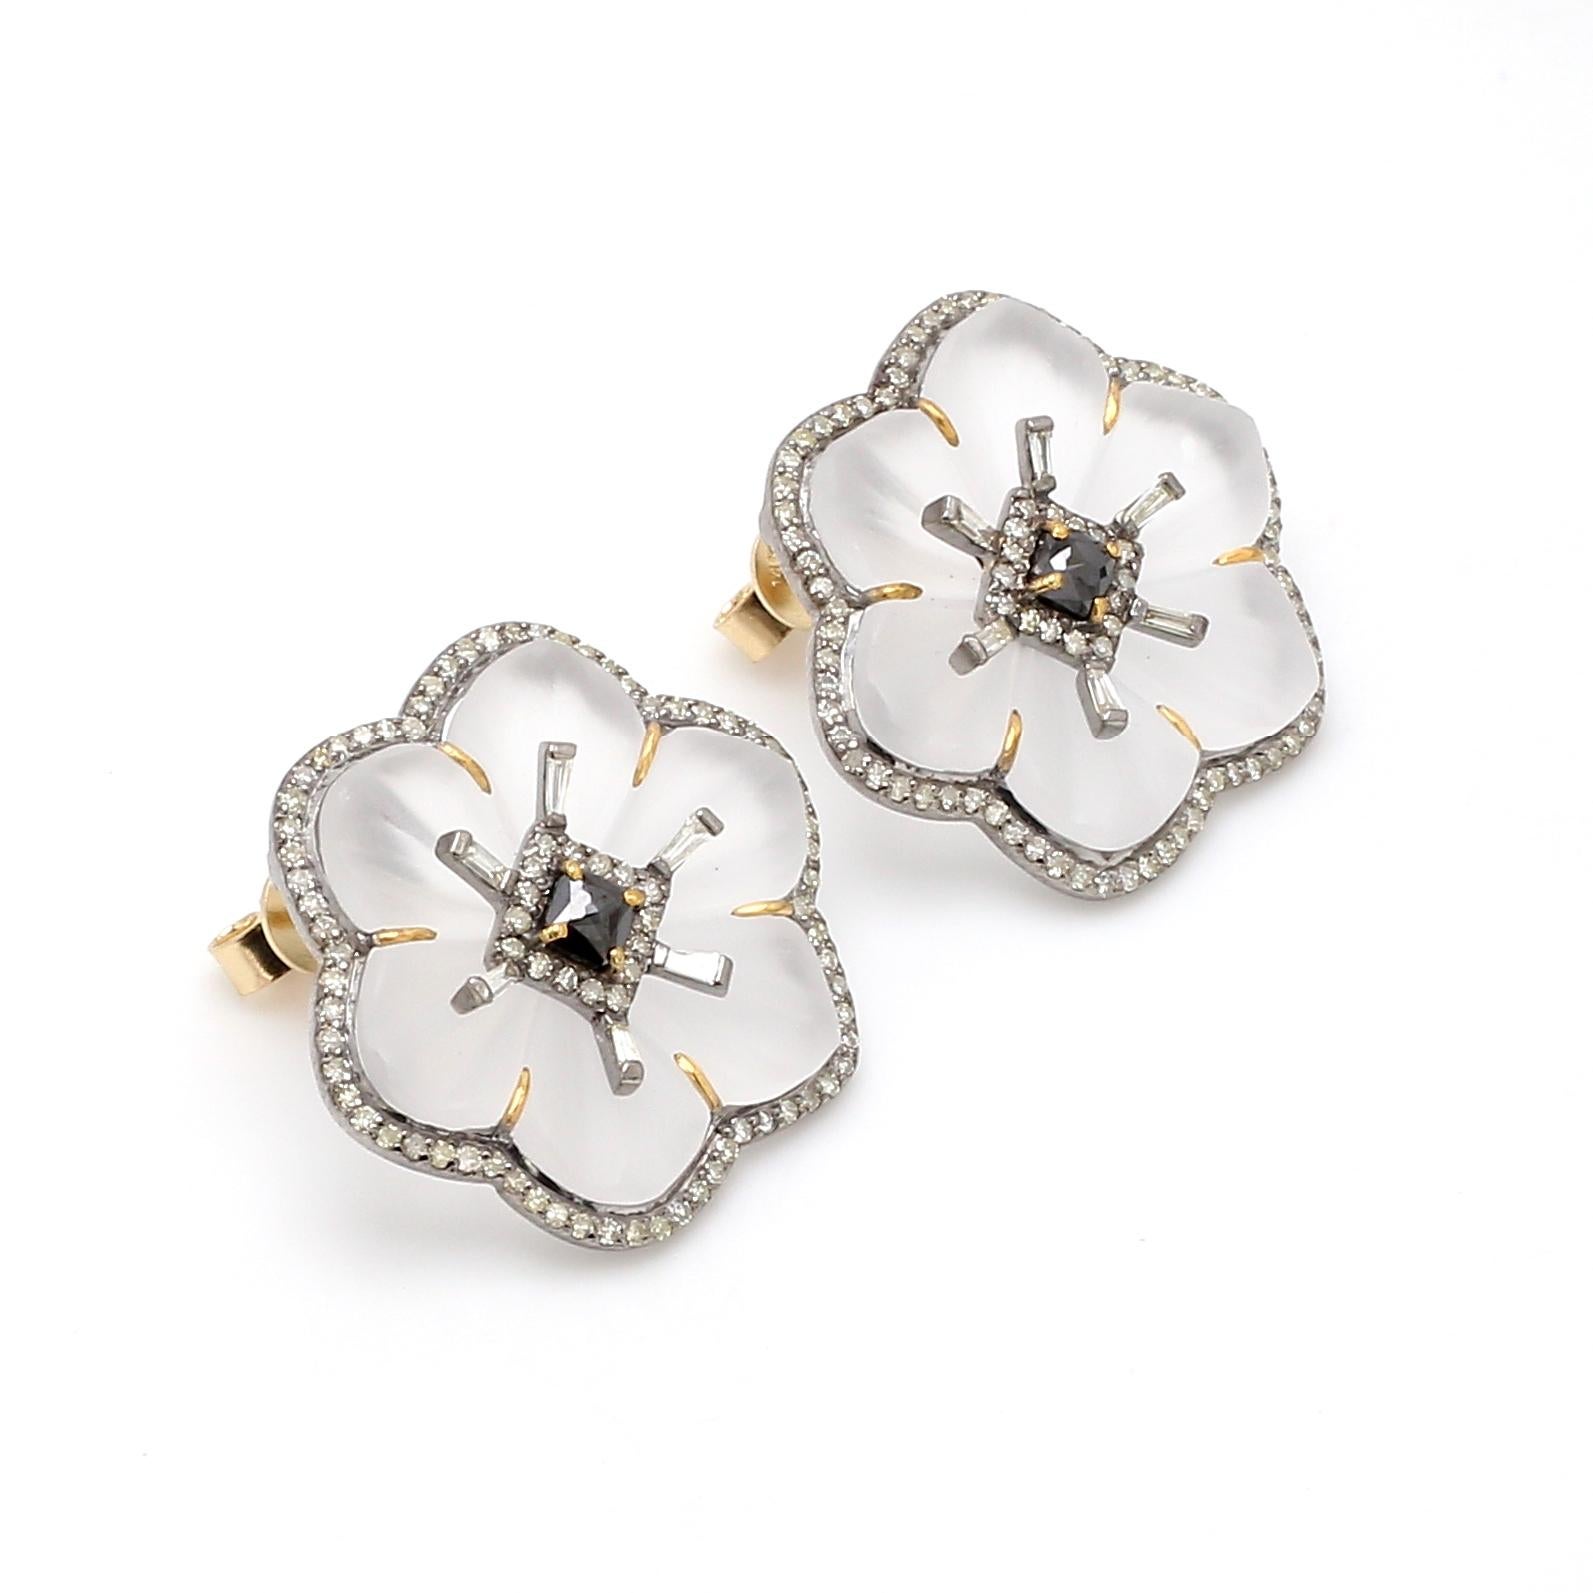 1.46 Carat White Diamond, Black Diamond, and Crystal Flower Stud Earrings 

This Victorian-era impeccable art-deco style clean crystal and diamond stud earring is opulent. The idyllic carved flower-shaped crystal is infamously set in the yellow gold